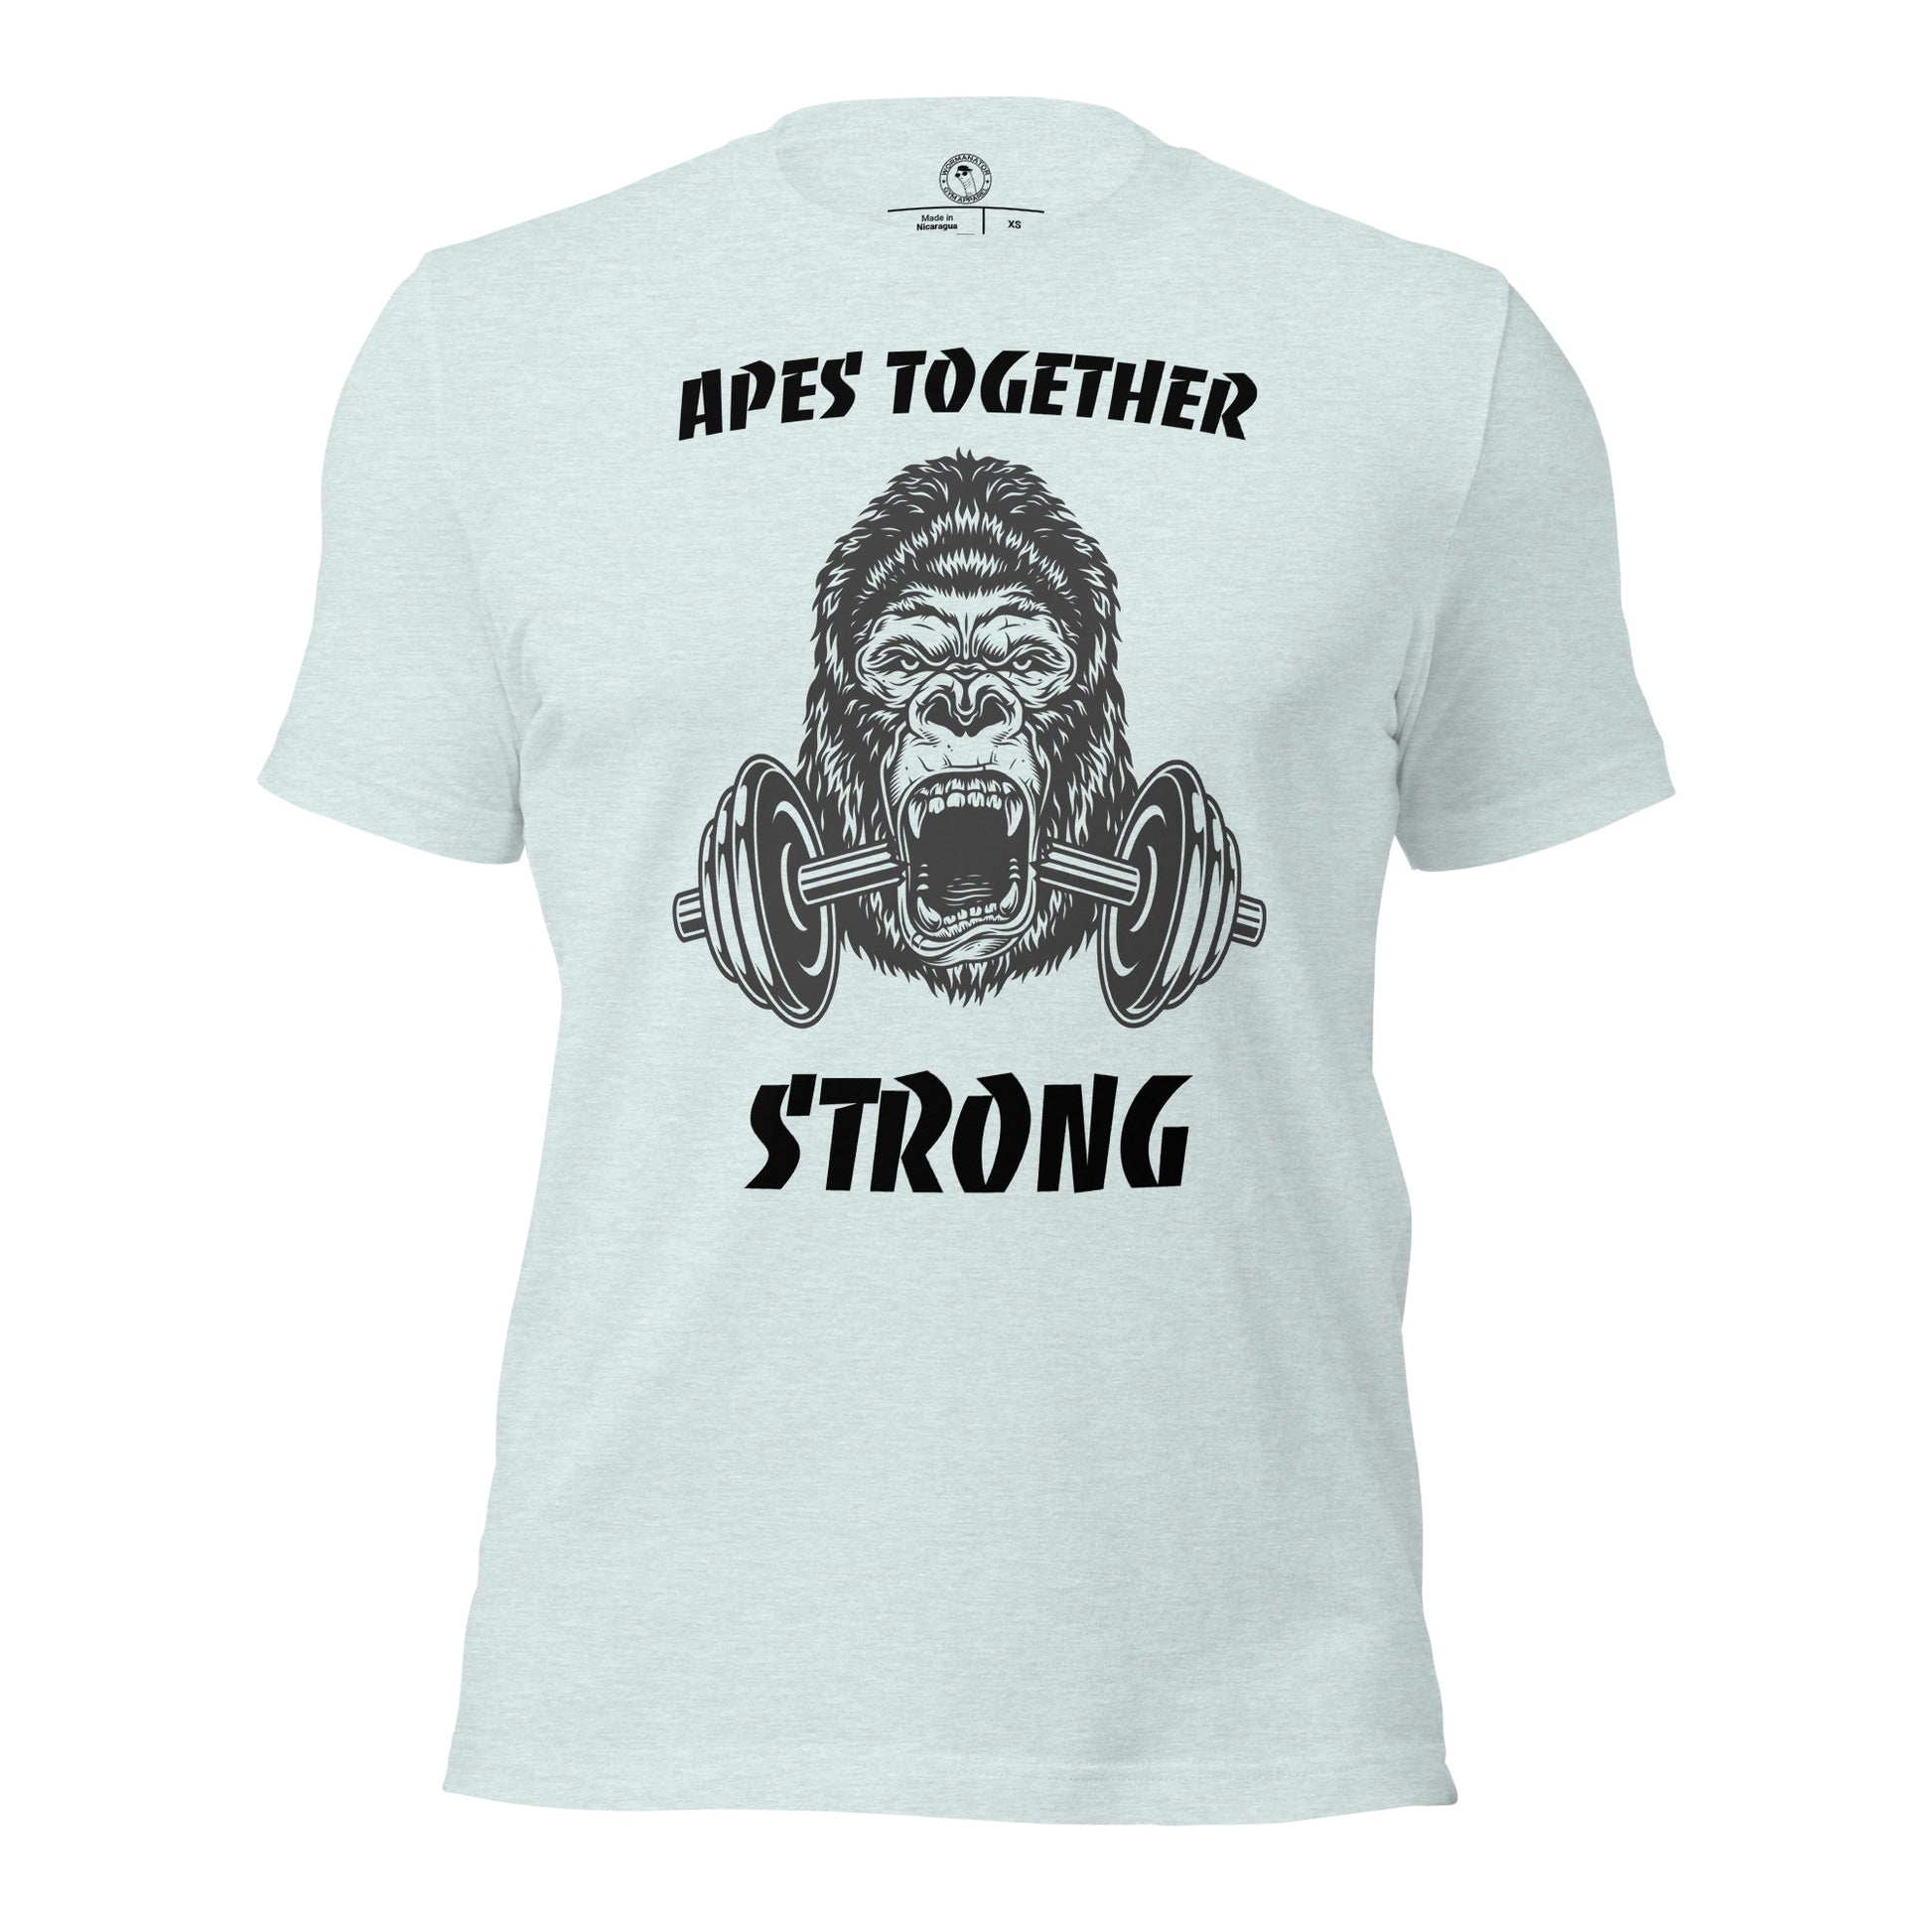 Apes Together Strong Shirt in Heather Prism Ice Blue